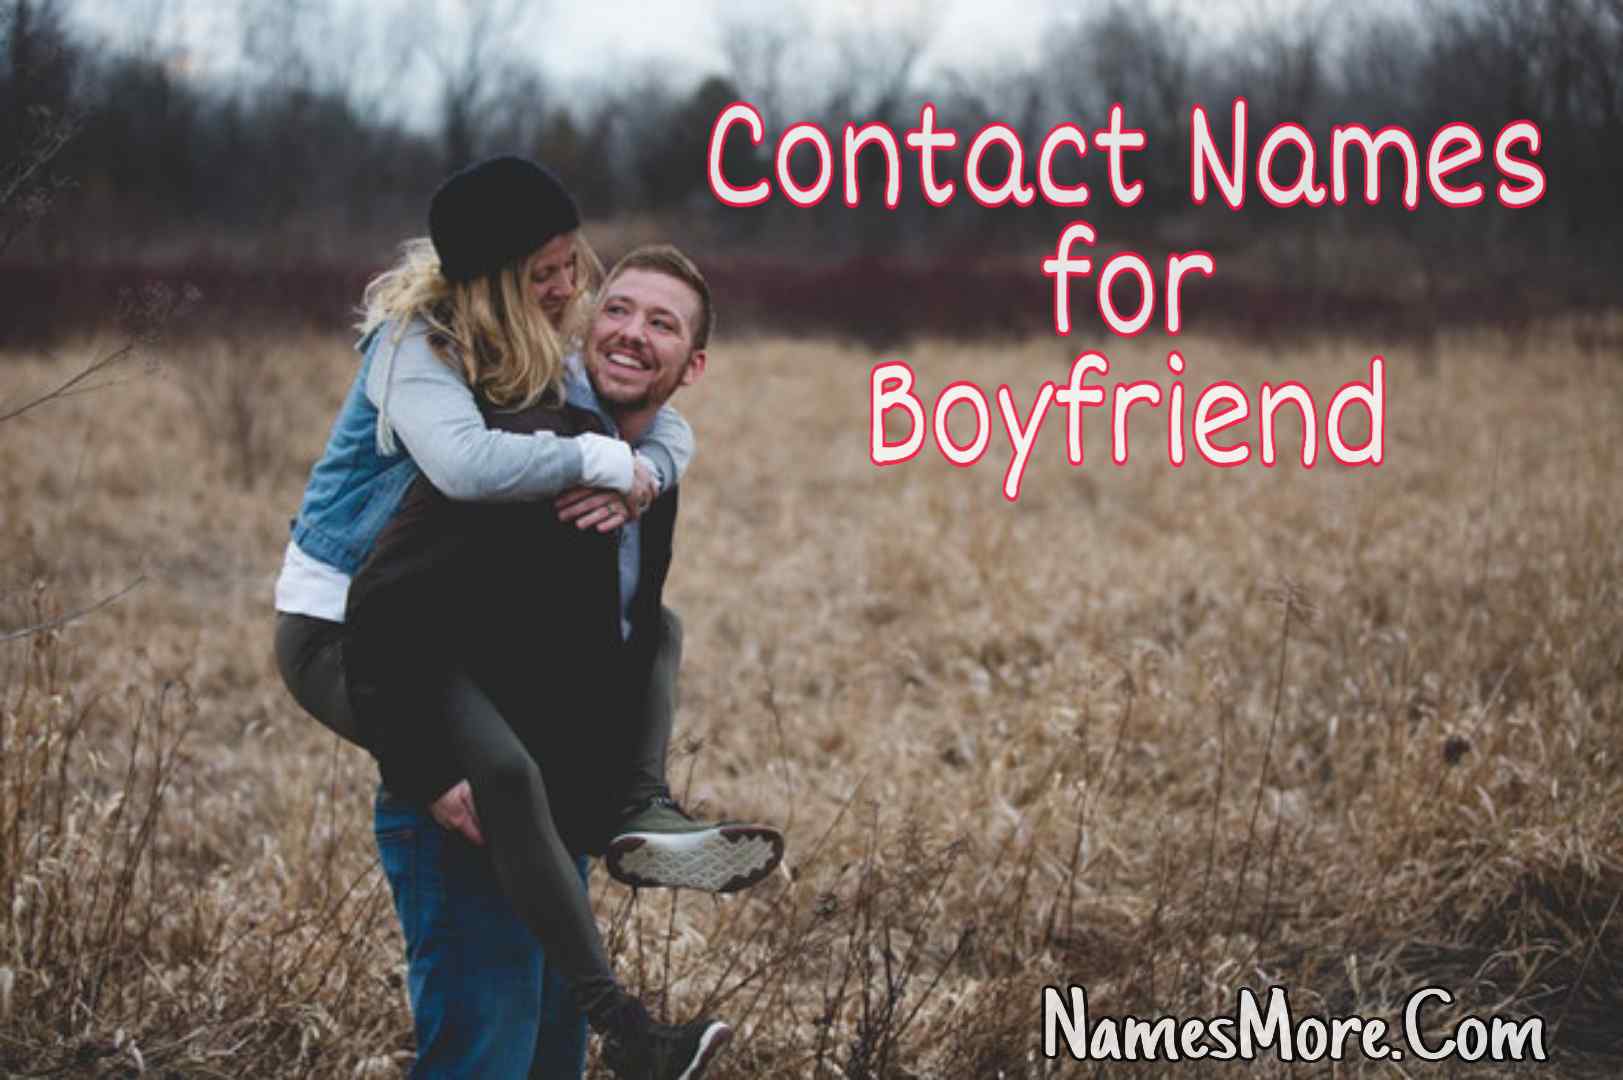 Featured Image for 960+ Contact Names For Boyfriend [Cool, Cute & Unique]